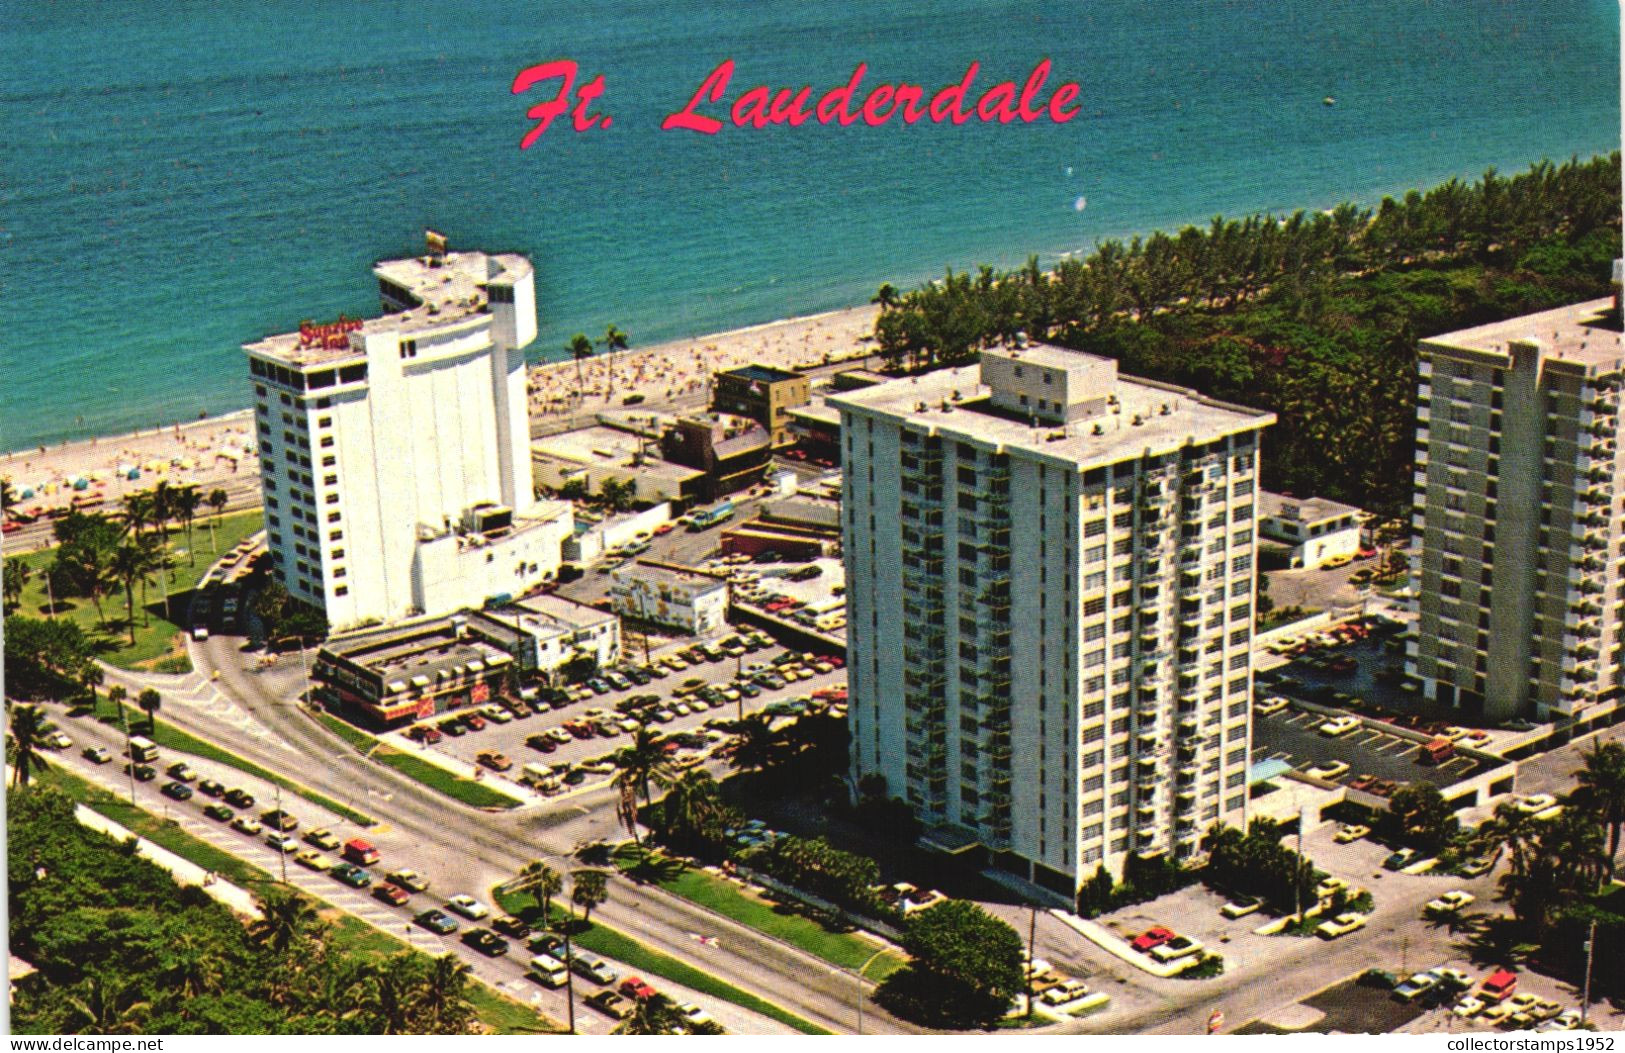 FORT LAUDERDALE, ARCHITECTURE, CARS, BEACH, UNITED STATES, POSTCARD - Fort Lauderdale